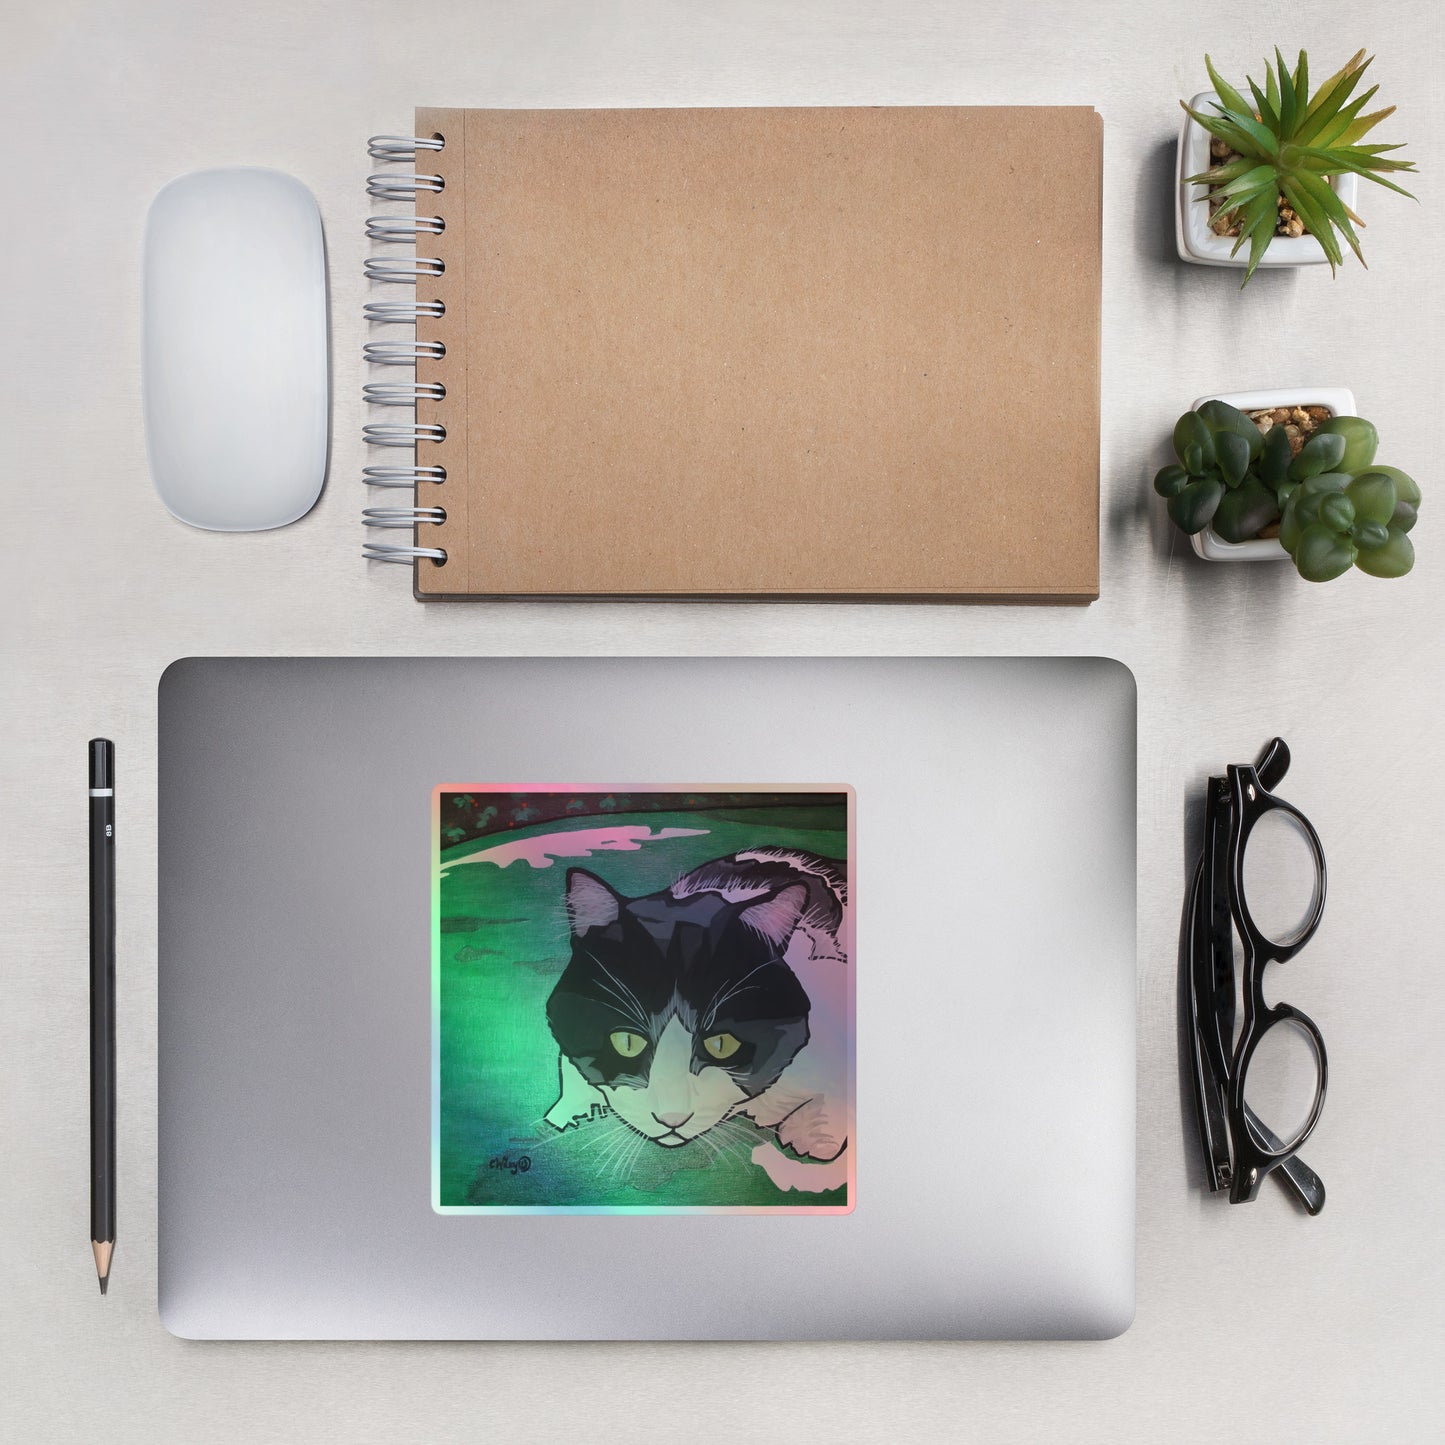 Black and White Cat on Green Grass Holographic stickers